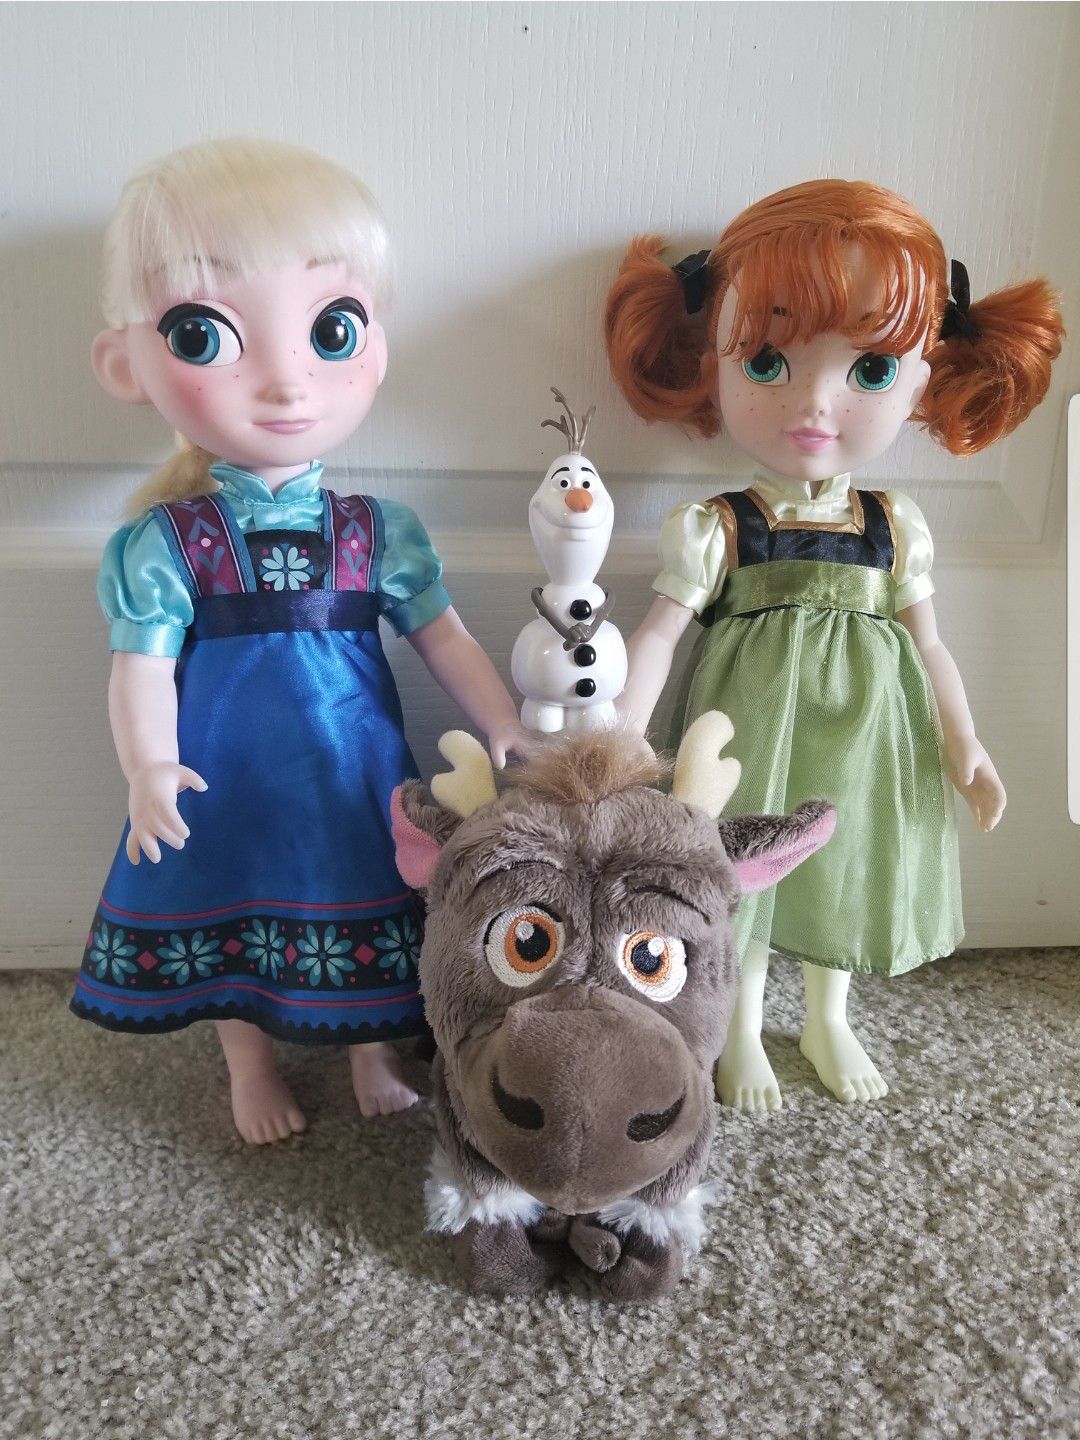 Disney Store Frozen dolls Animator's Elsa 16" and Disney Collection Ana toddler doll with reindeer S